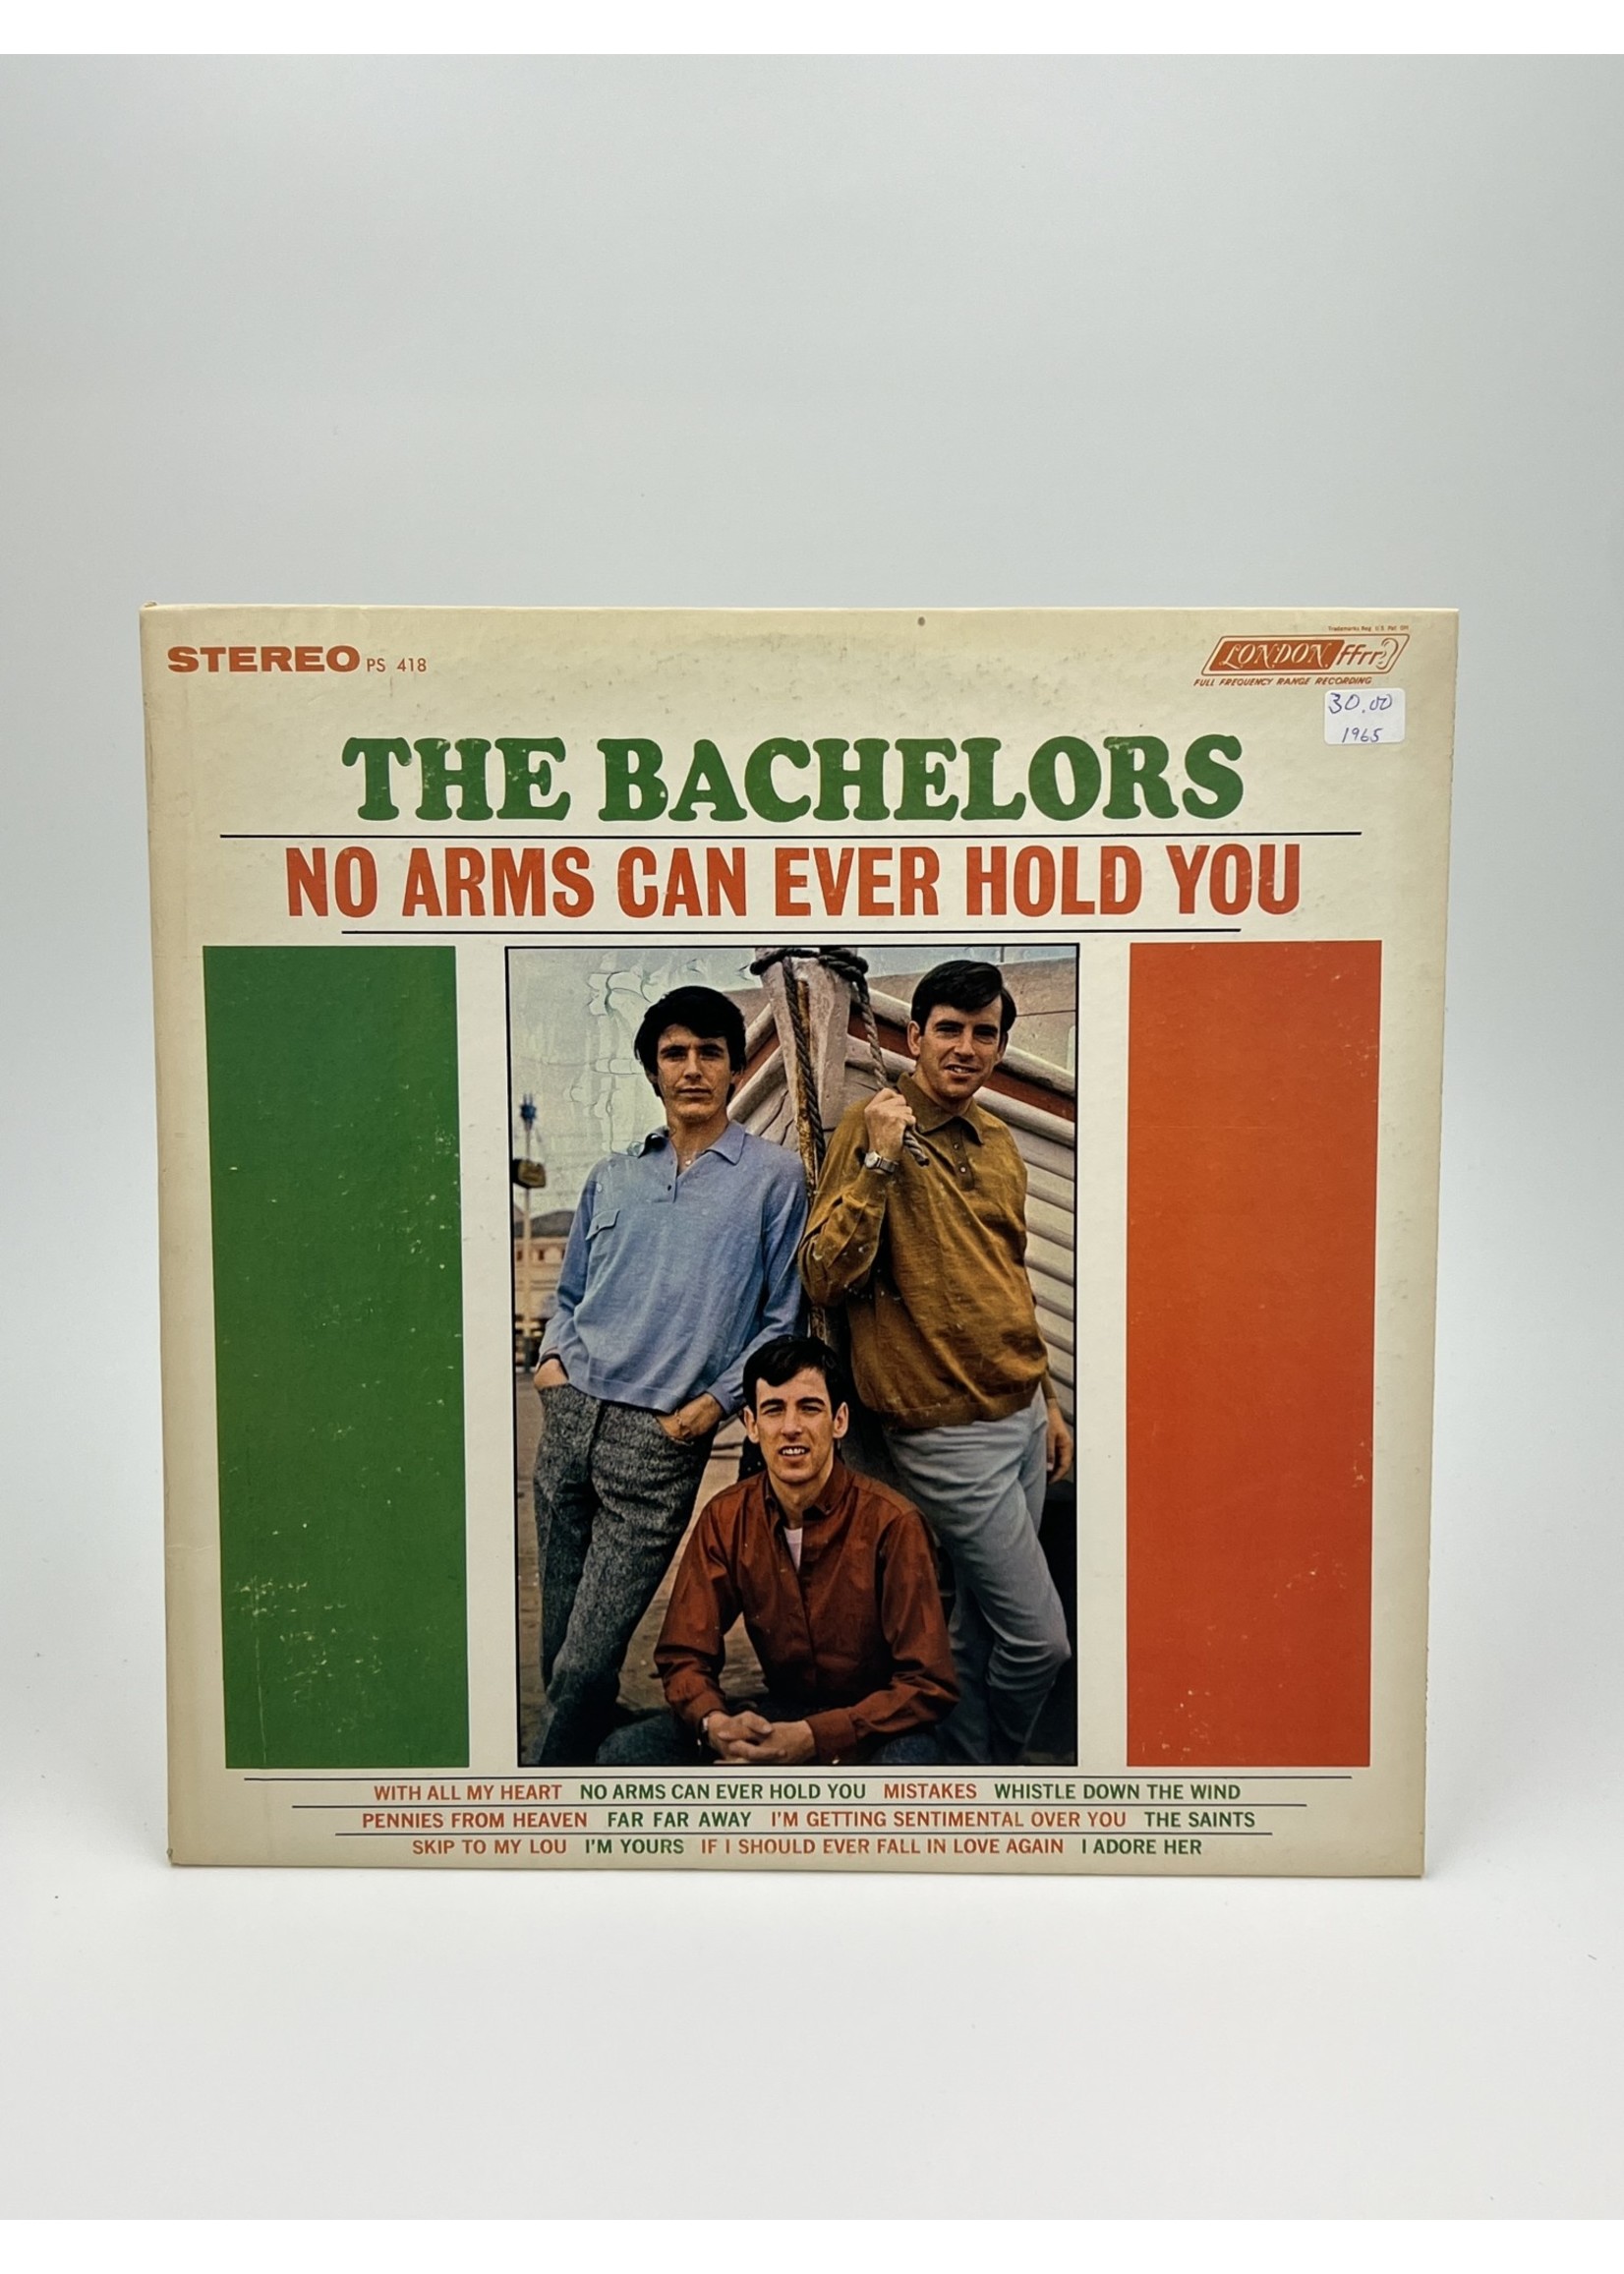 LP The Bachelors No Arms Can Ever Hold You LP Record